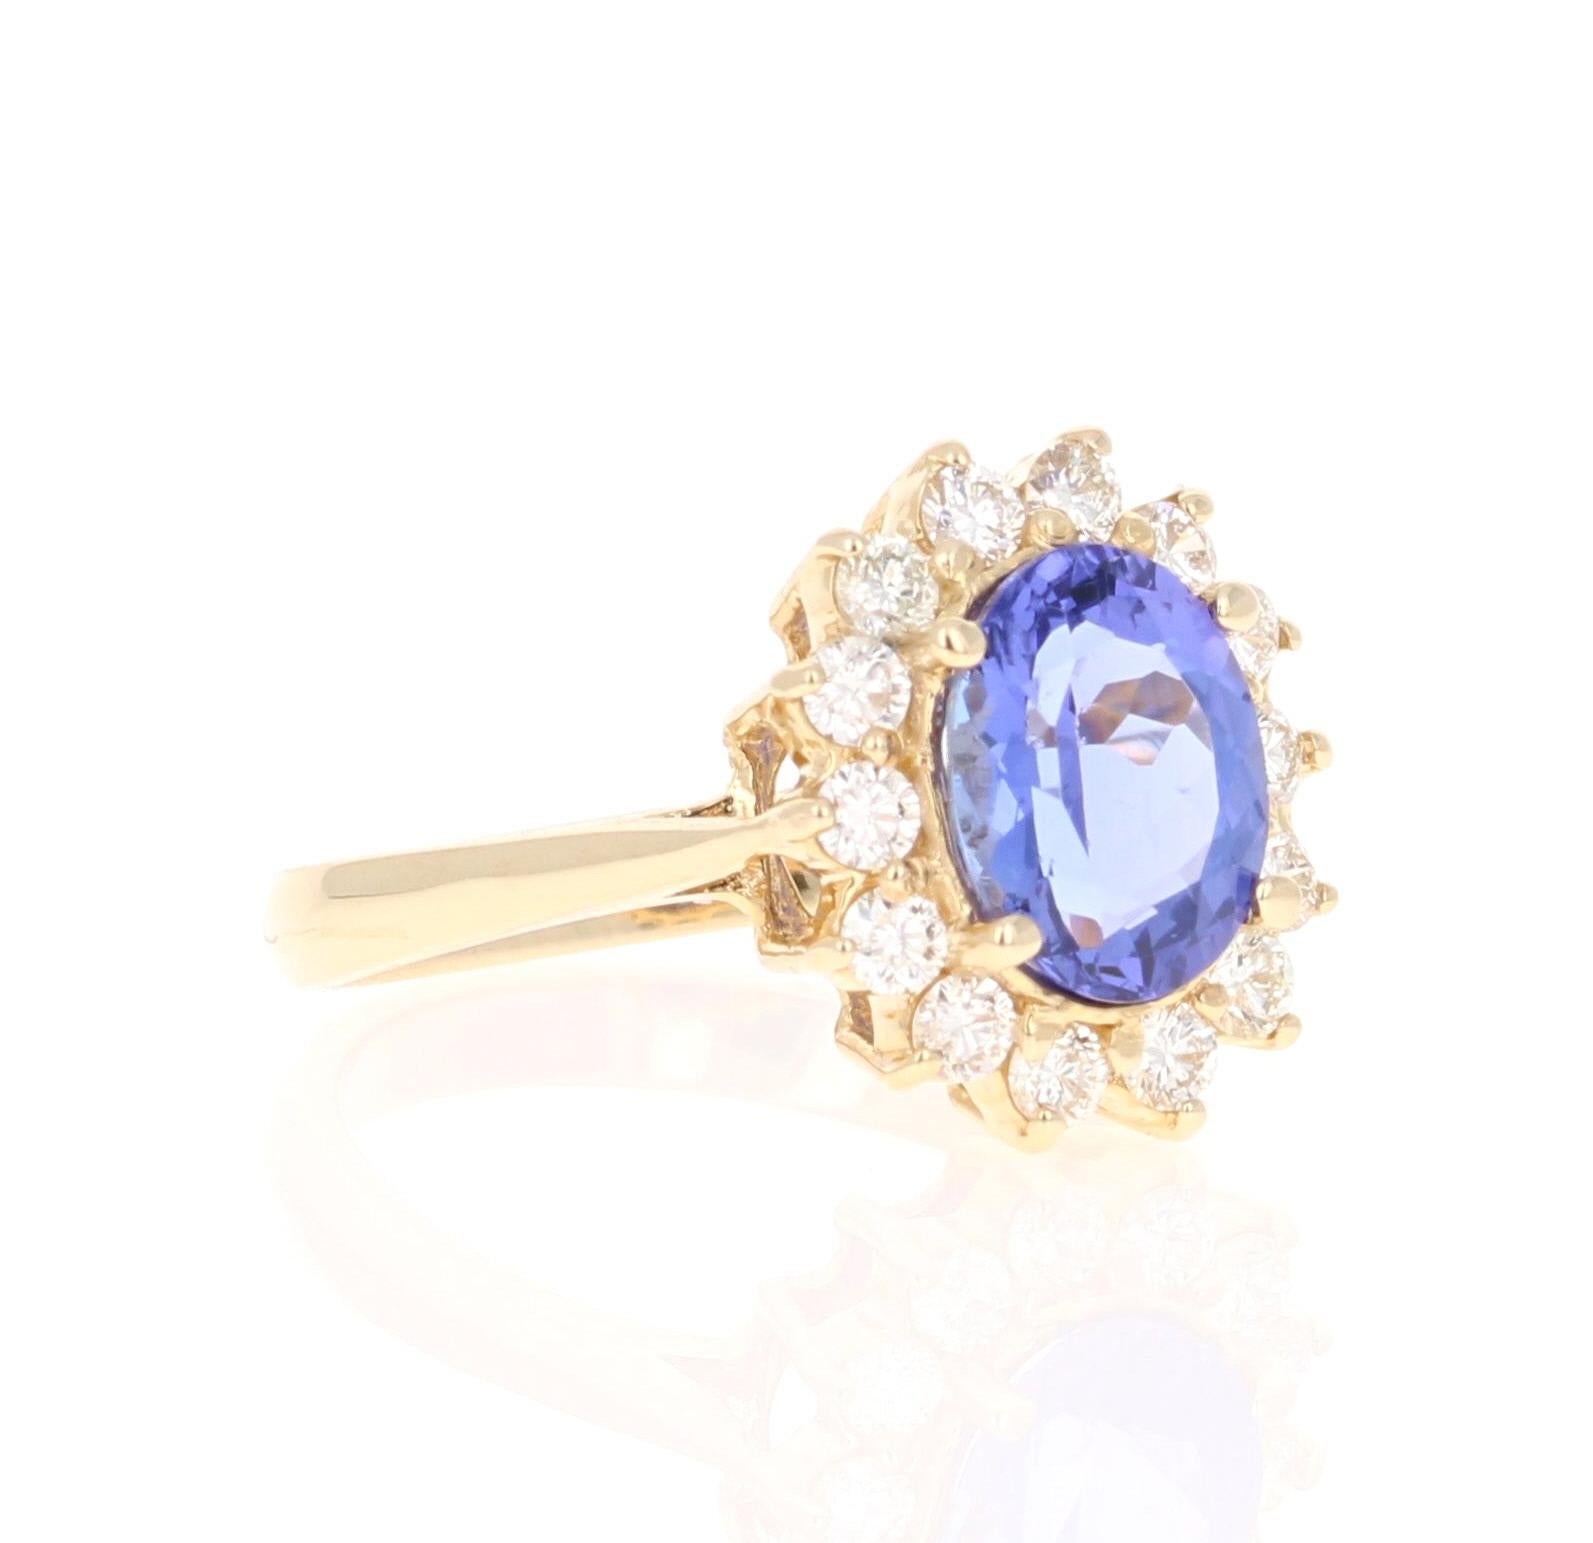 This ring has an Oval Cut Tanzanite that weighs 2.03 Carats and is adorned with 14 Round Cut Diamonds that weigh 0.56 Carats. The total carat weight of the ring is 2.59 Carats. (Clarity: VS, Color: H) The tanzanite measures at 7 mm x 9 mm (width x